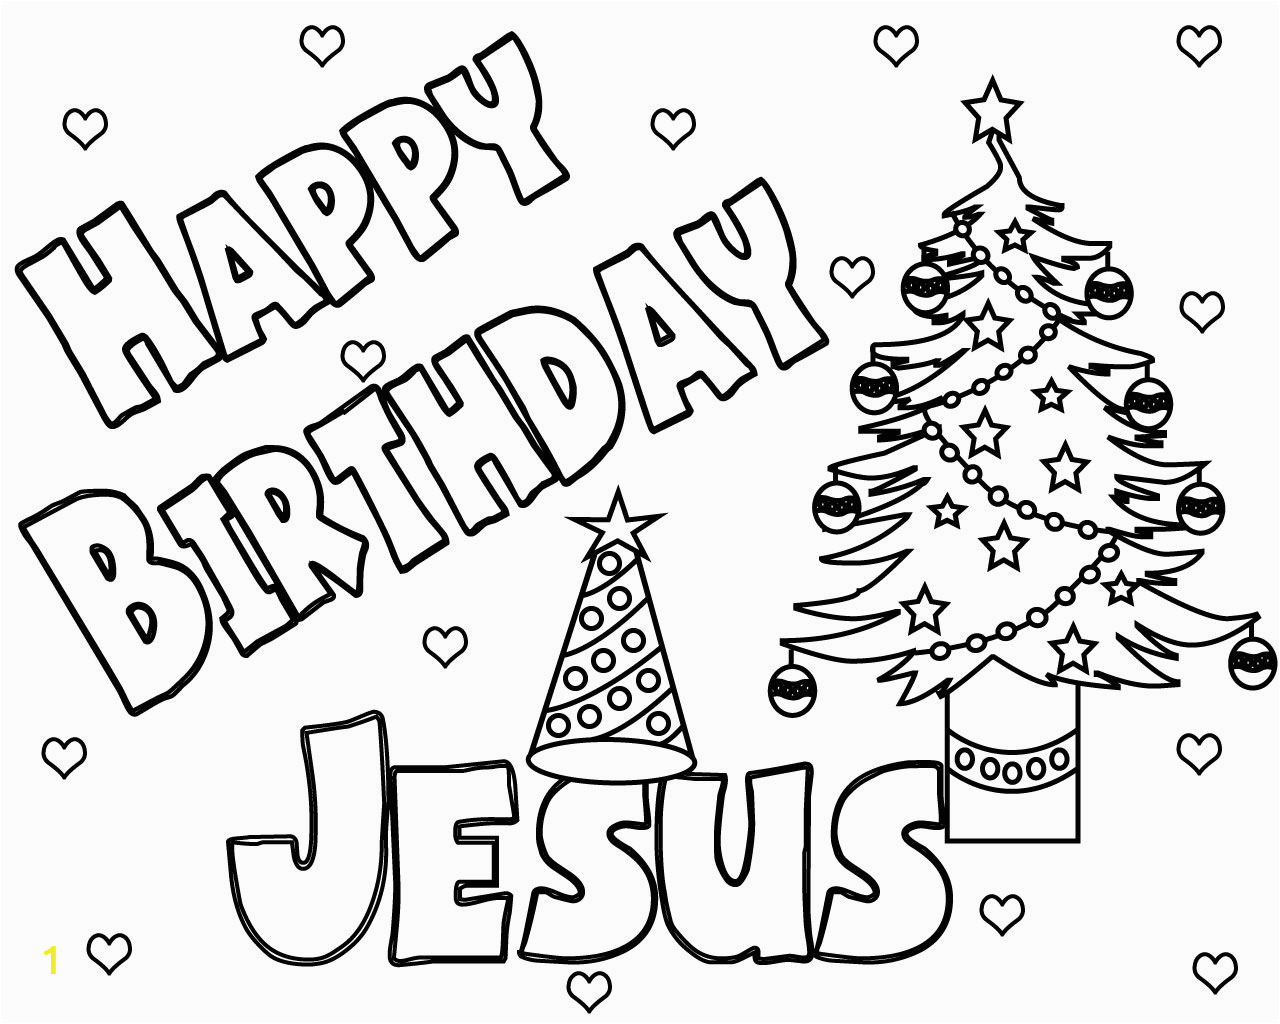 Happy Birthday Jesus Printable Coloring Pages Happy Birthday Jesus Coloring Pages Jesus Birthday is